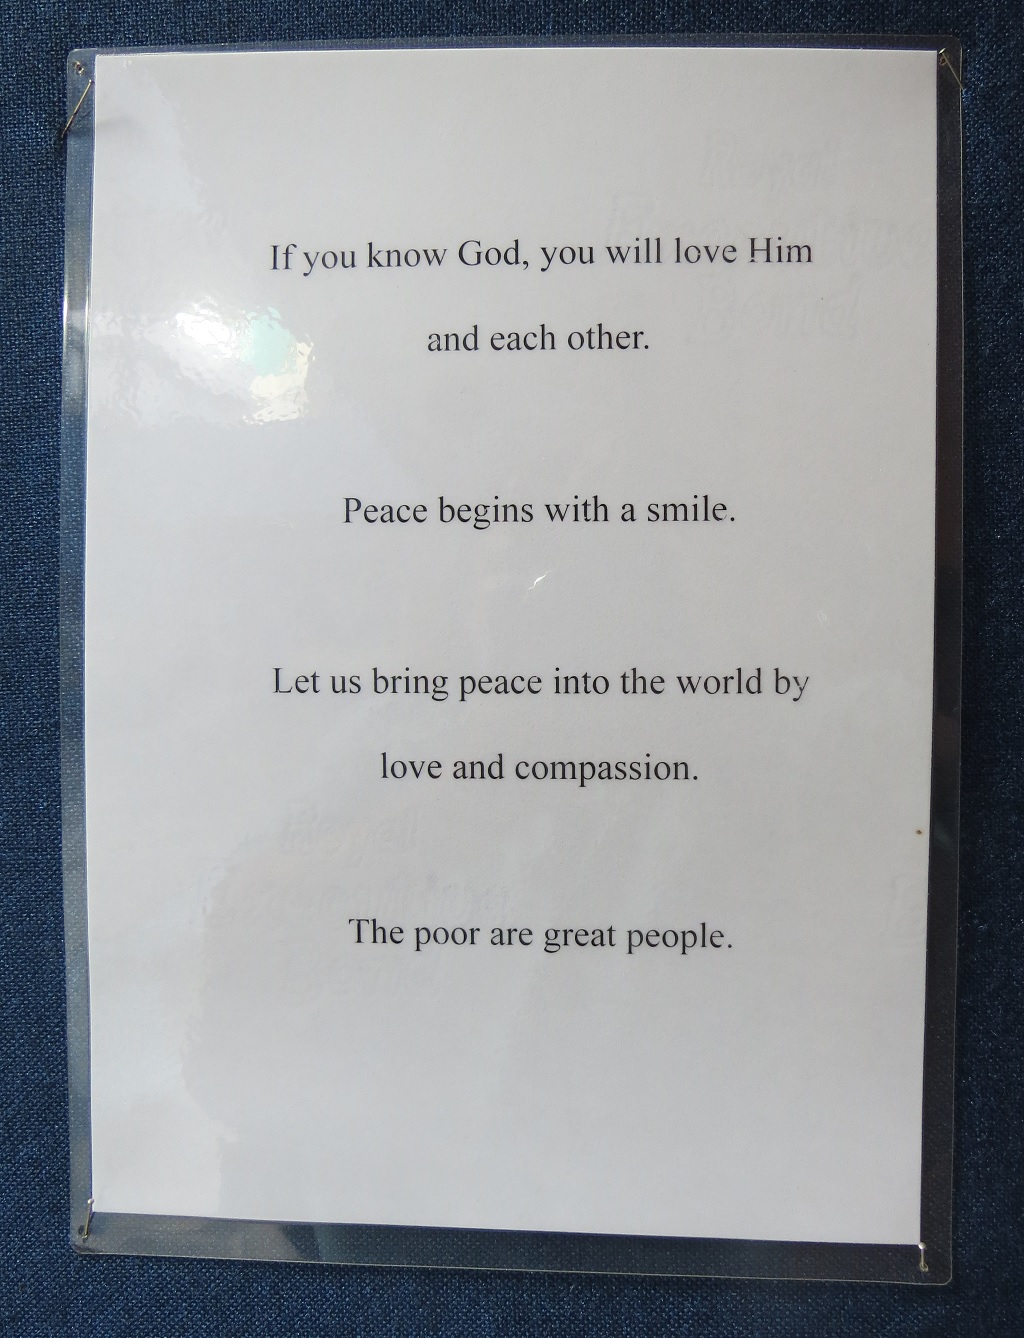 Quotes by Mother Teresa (Part IV)